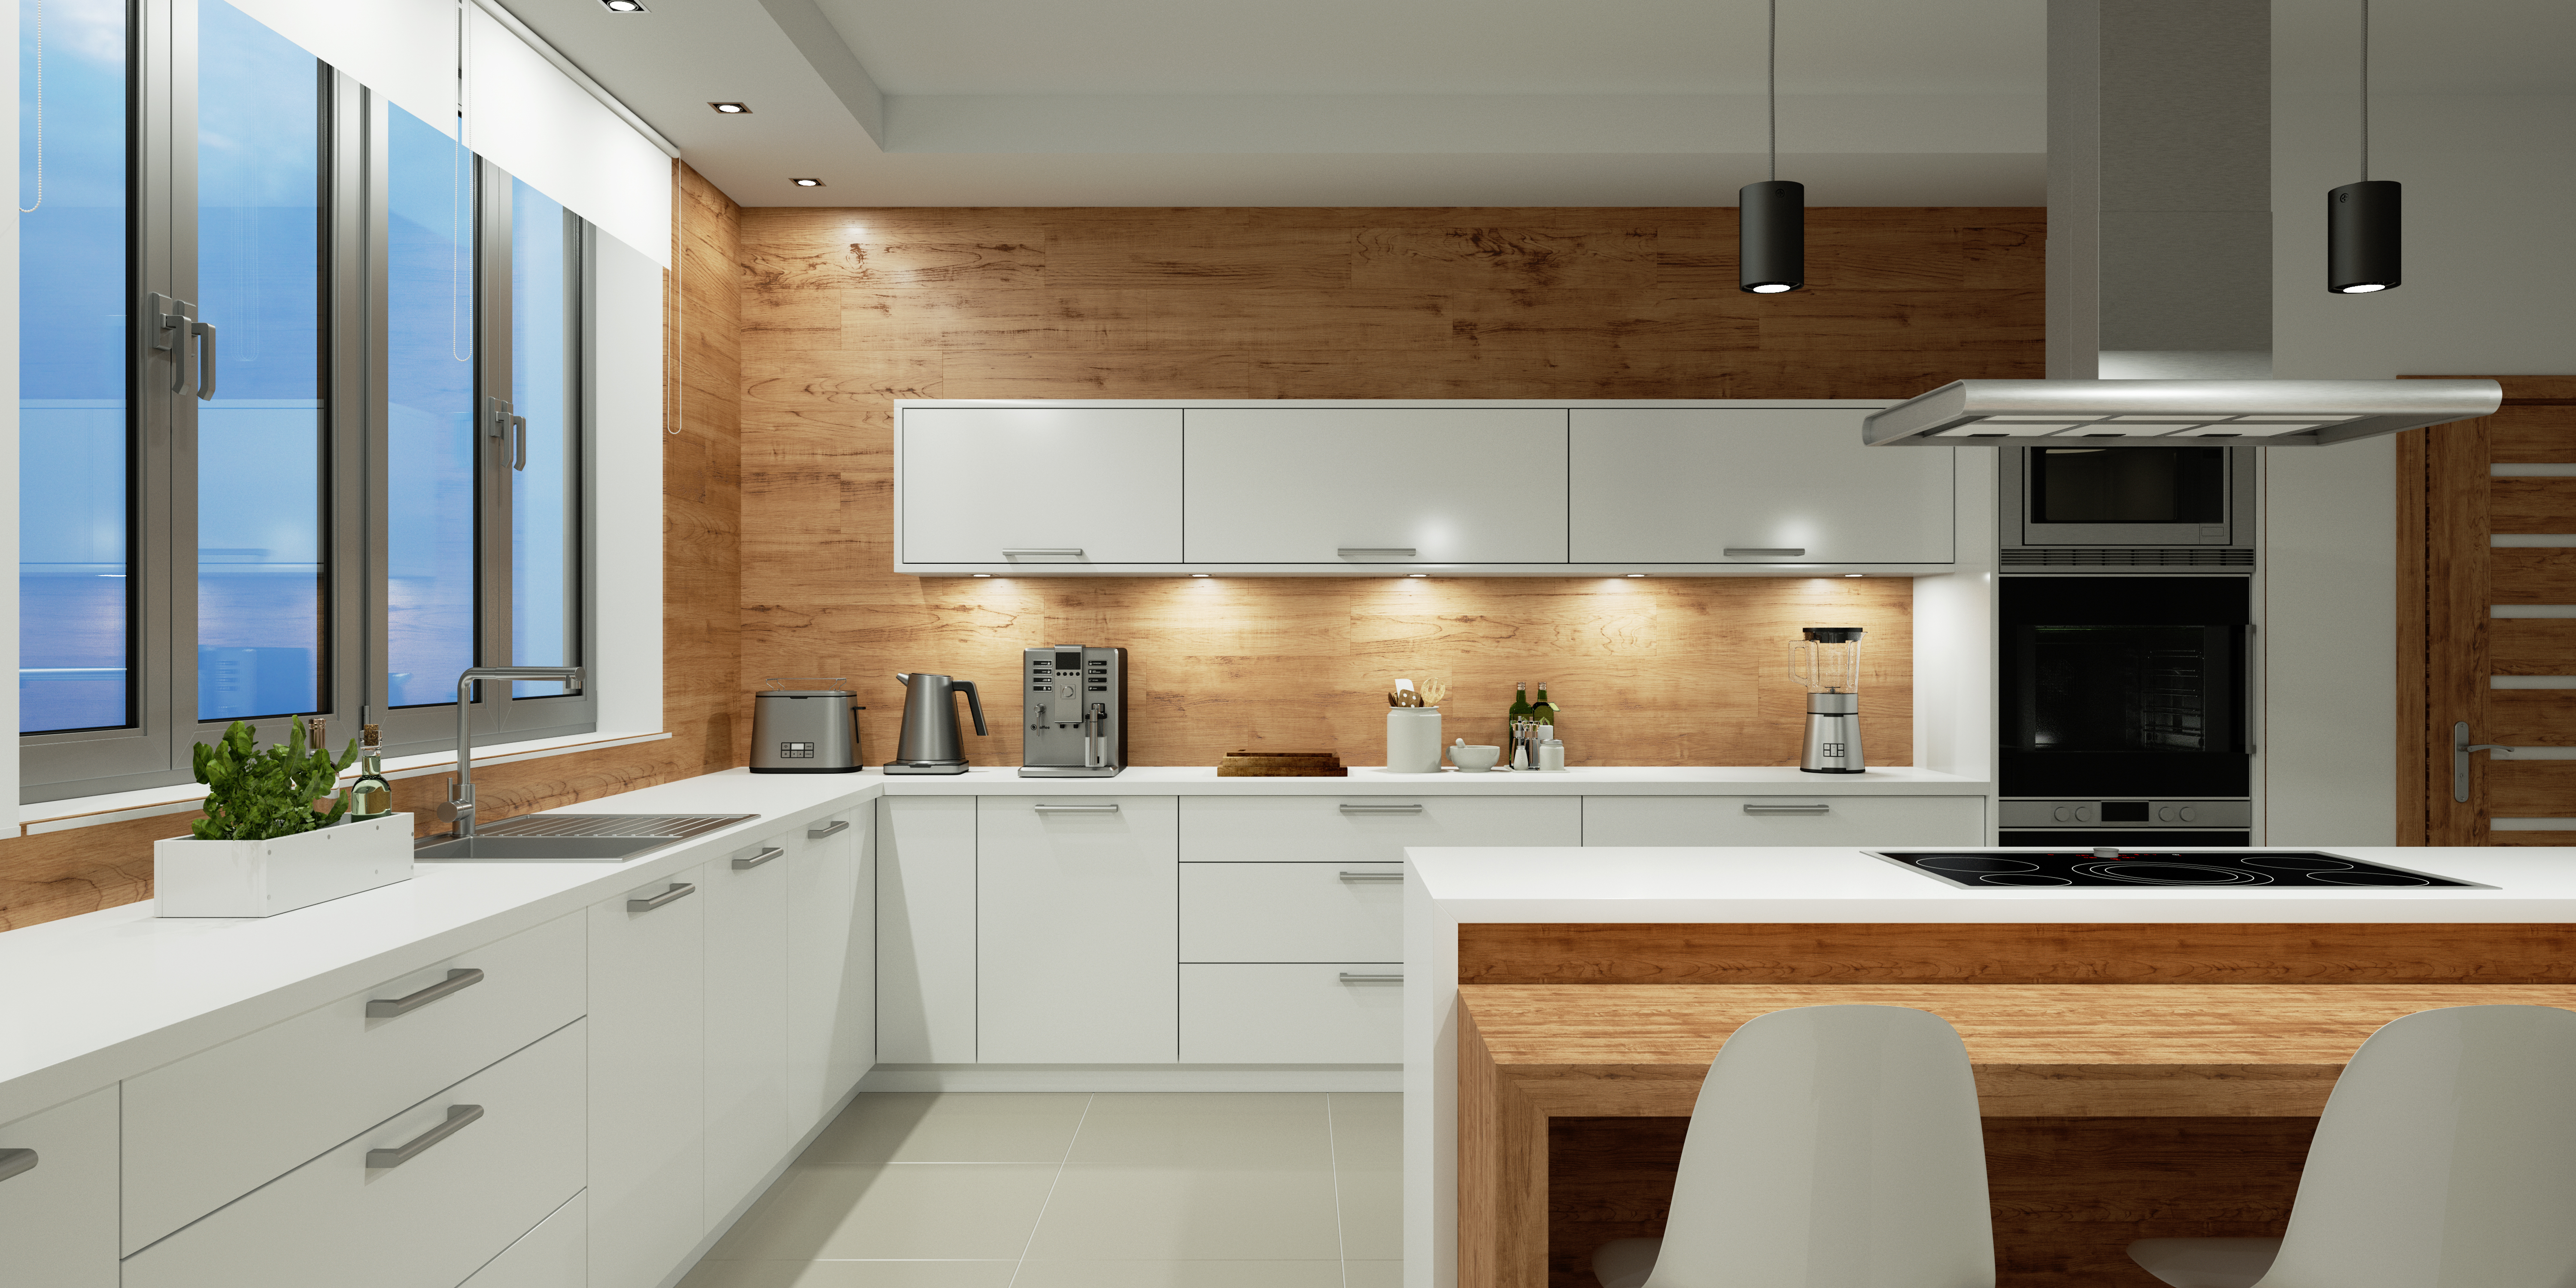 electrical points for kitchen lights